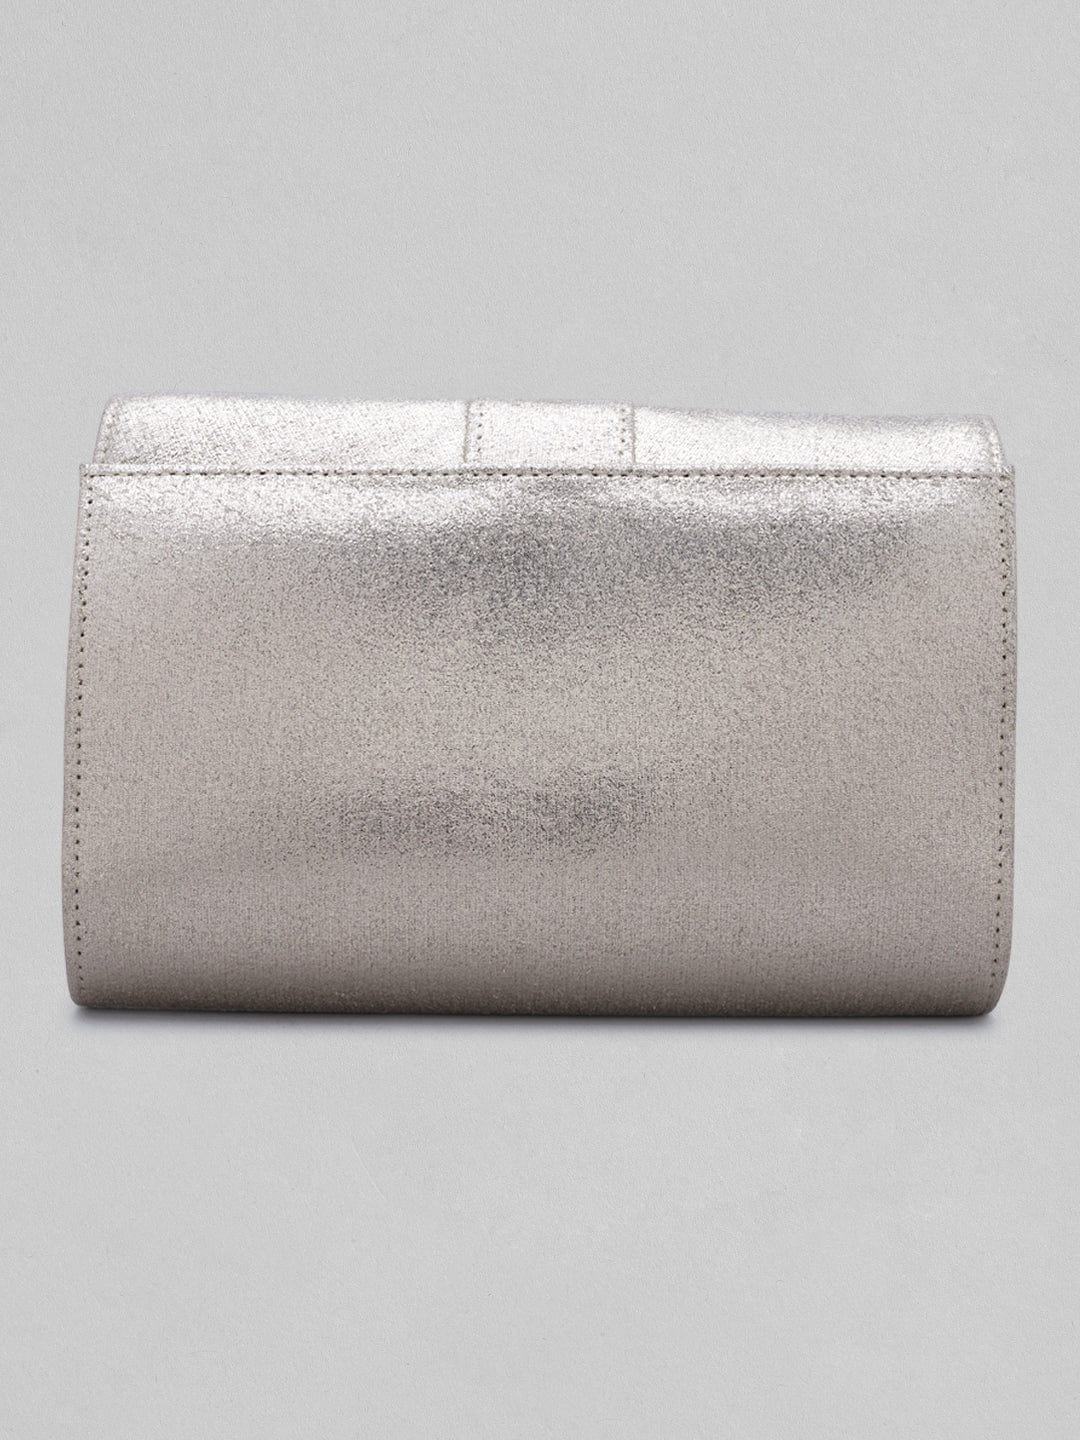 Rubans Silver Coloured Clutch Bag With Studded Stone Design Handbag & Wallet Accessories